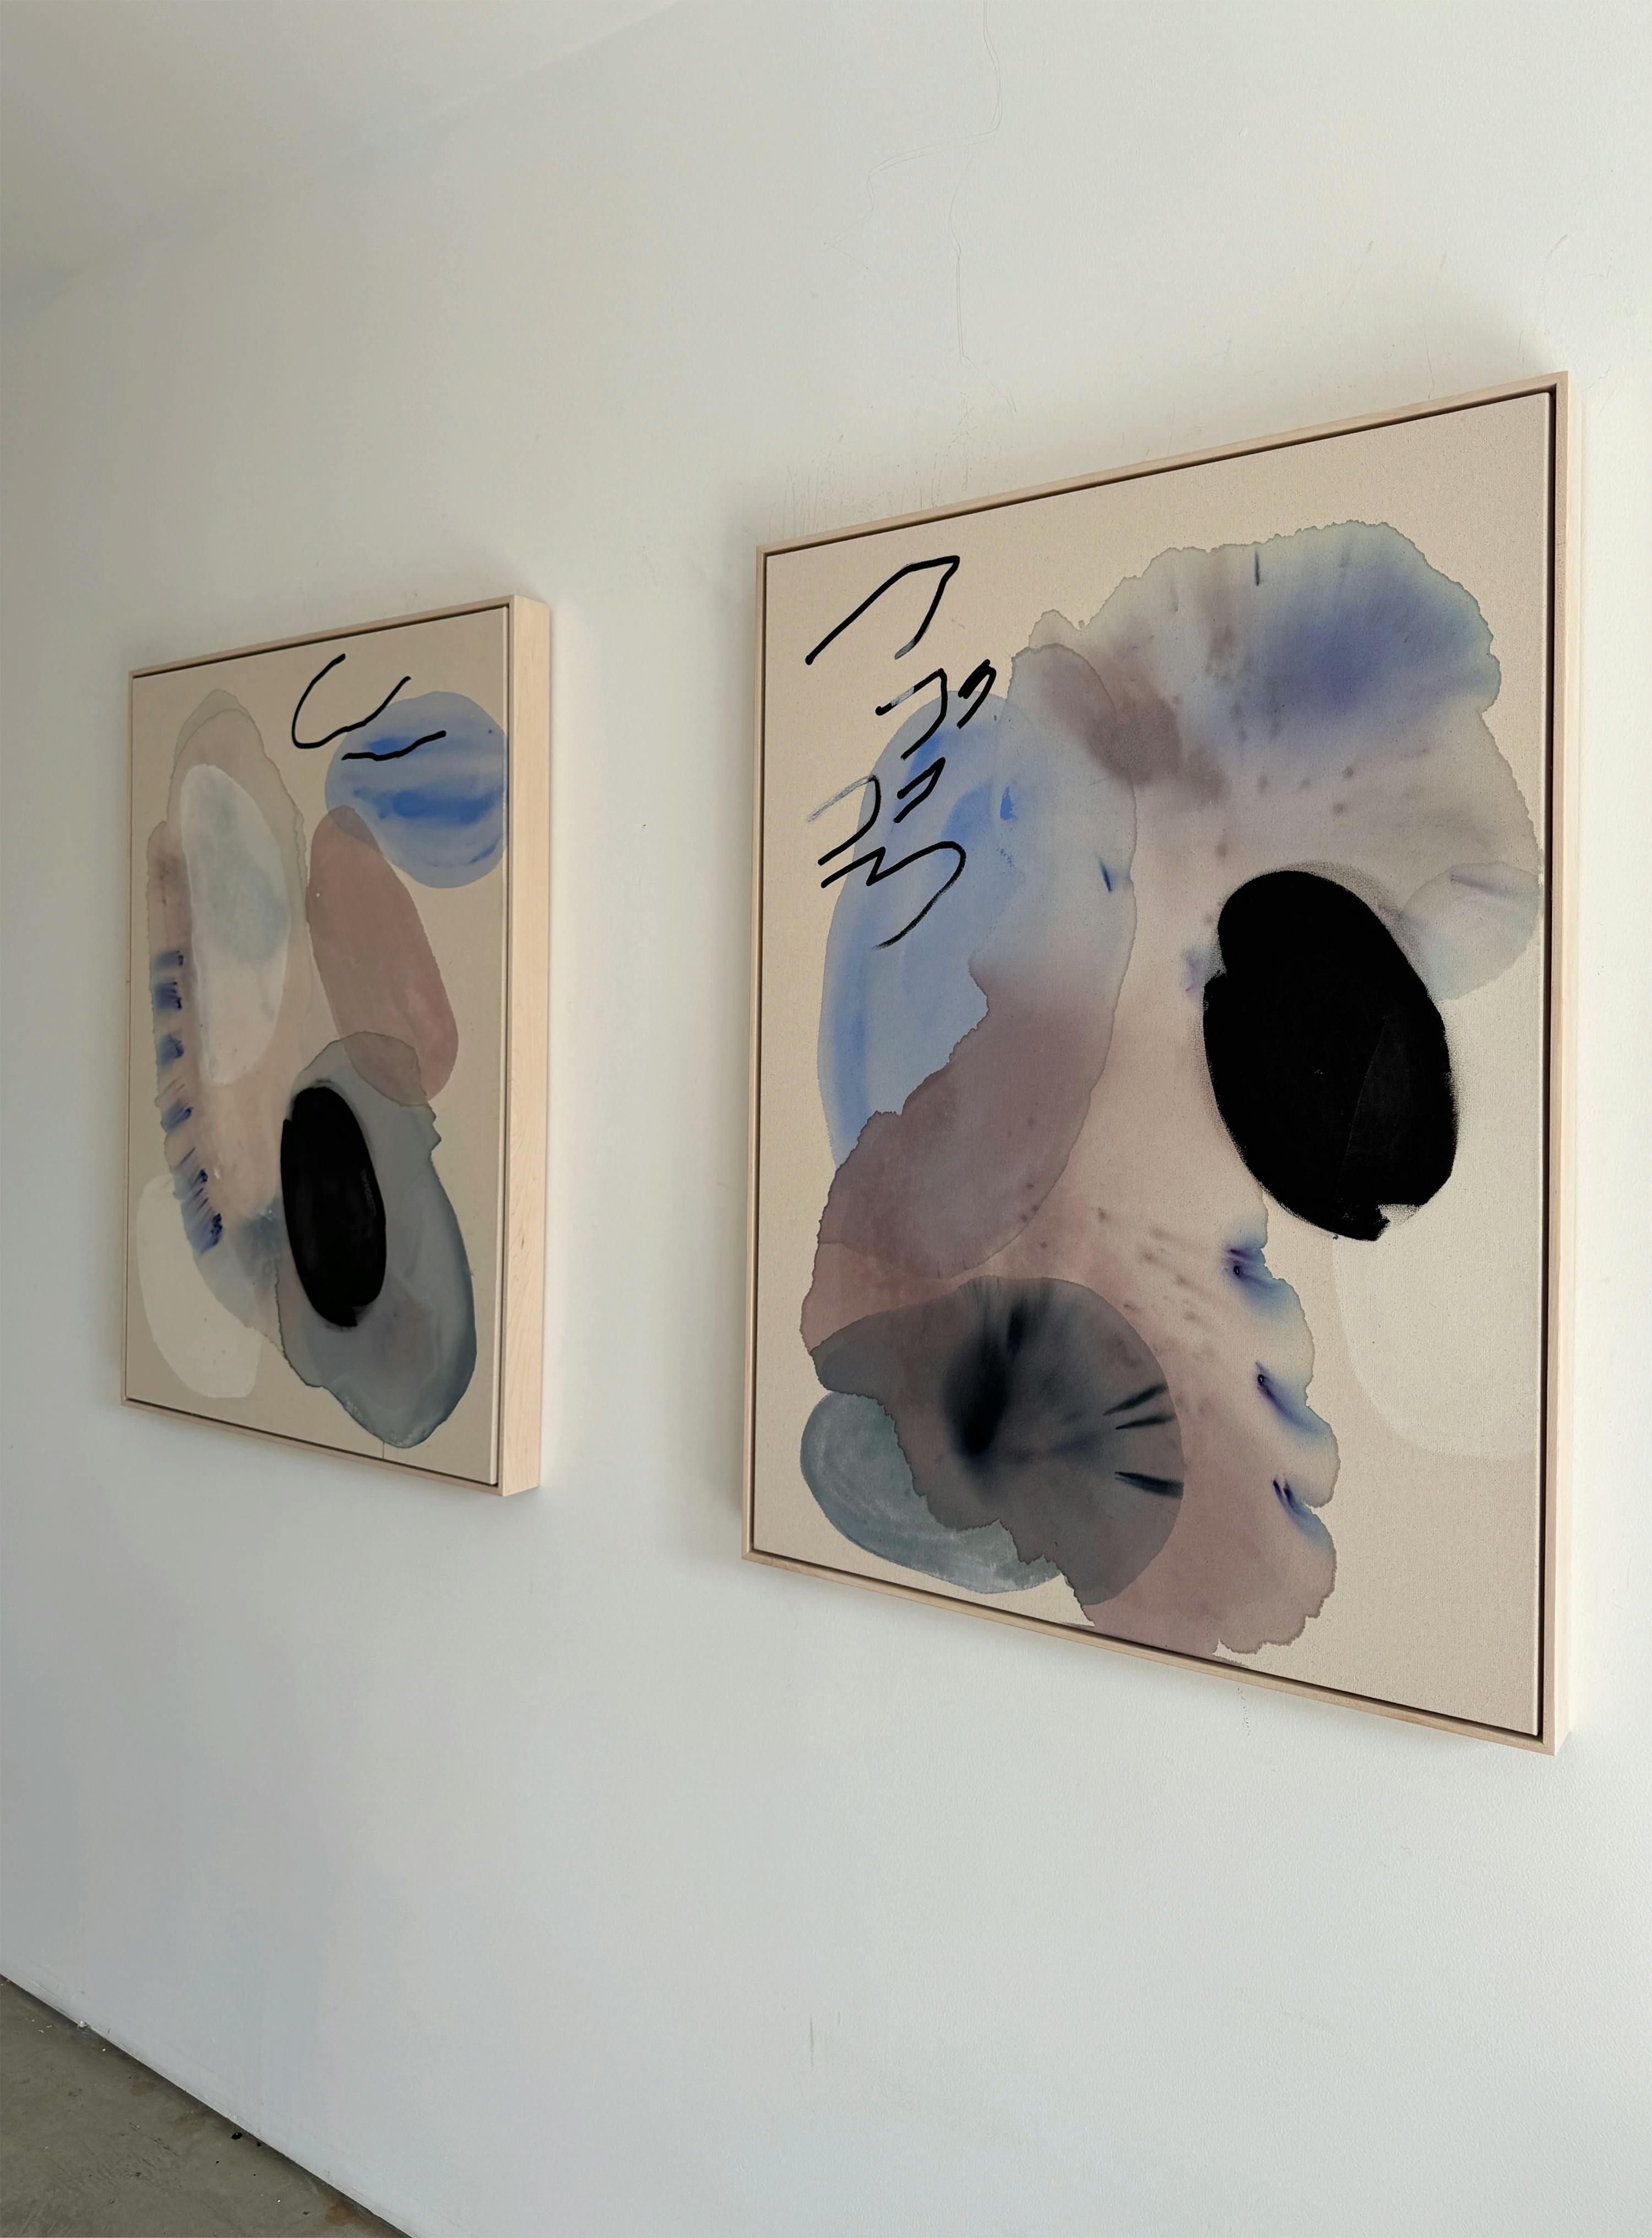 Two abstract, gestural paintings by artist Karina Bania installed side-by-side on a white wall in her studio.